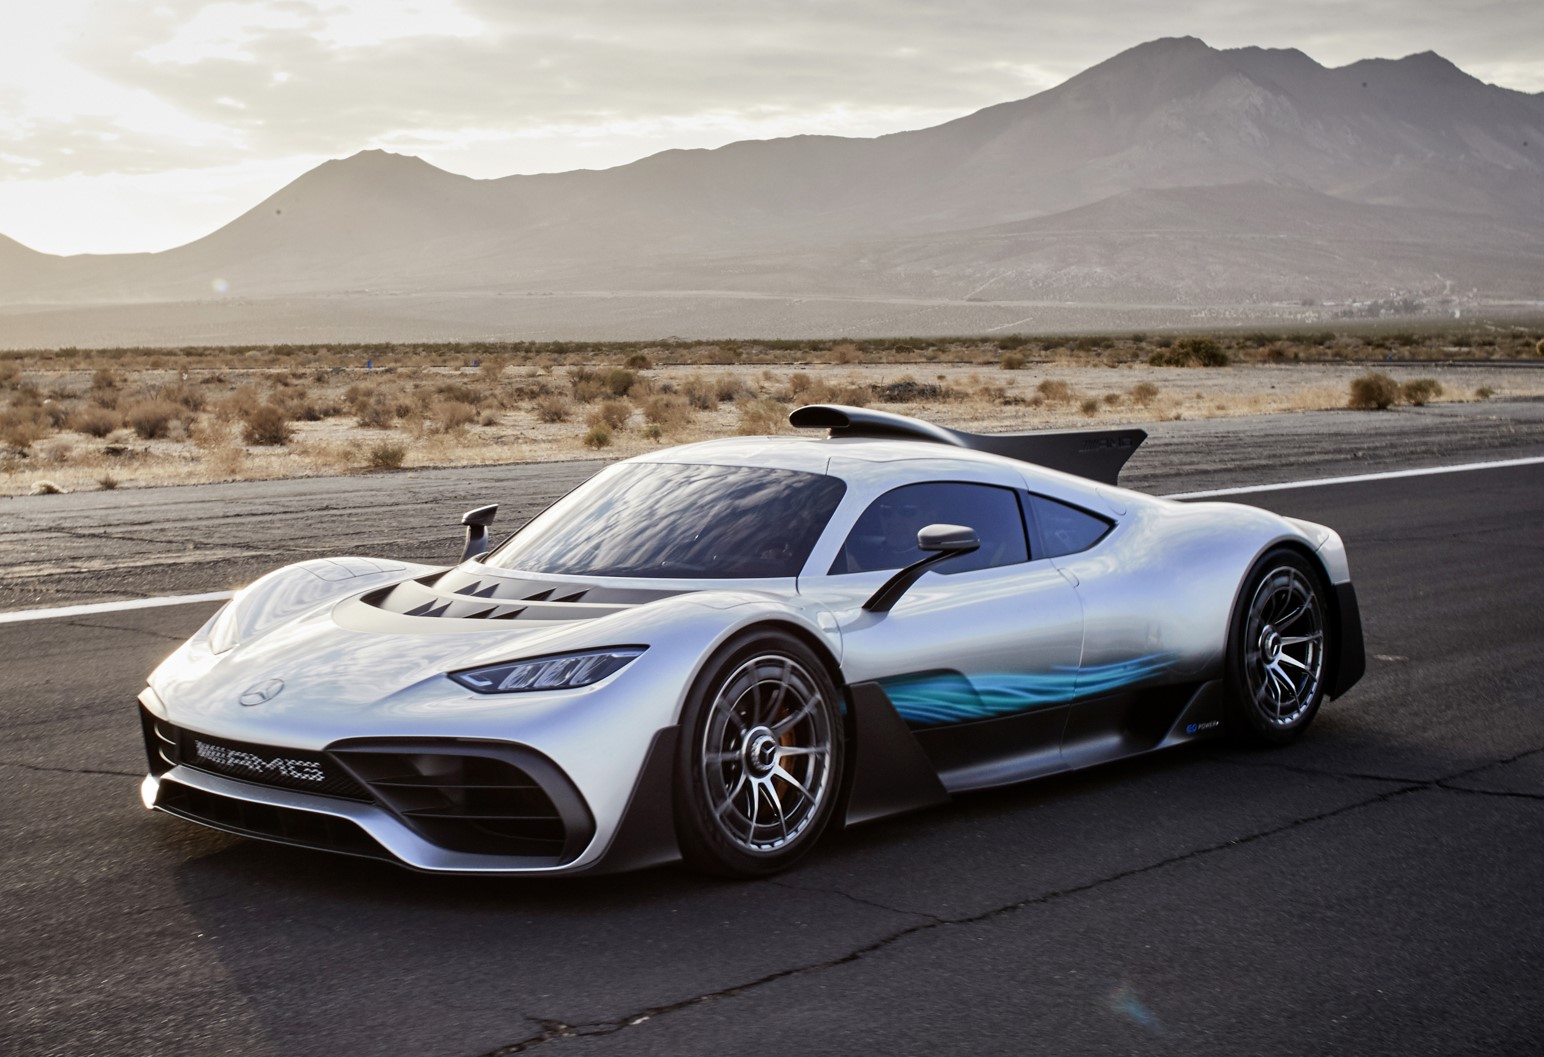 Mercedes-AMG F1 W12 E Performance & Mercedes-AMG Project One 76909, Speed  Champions